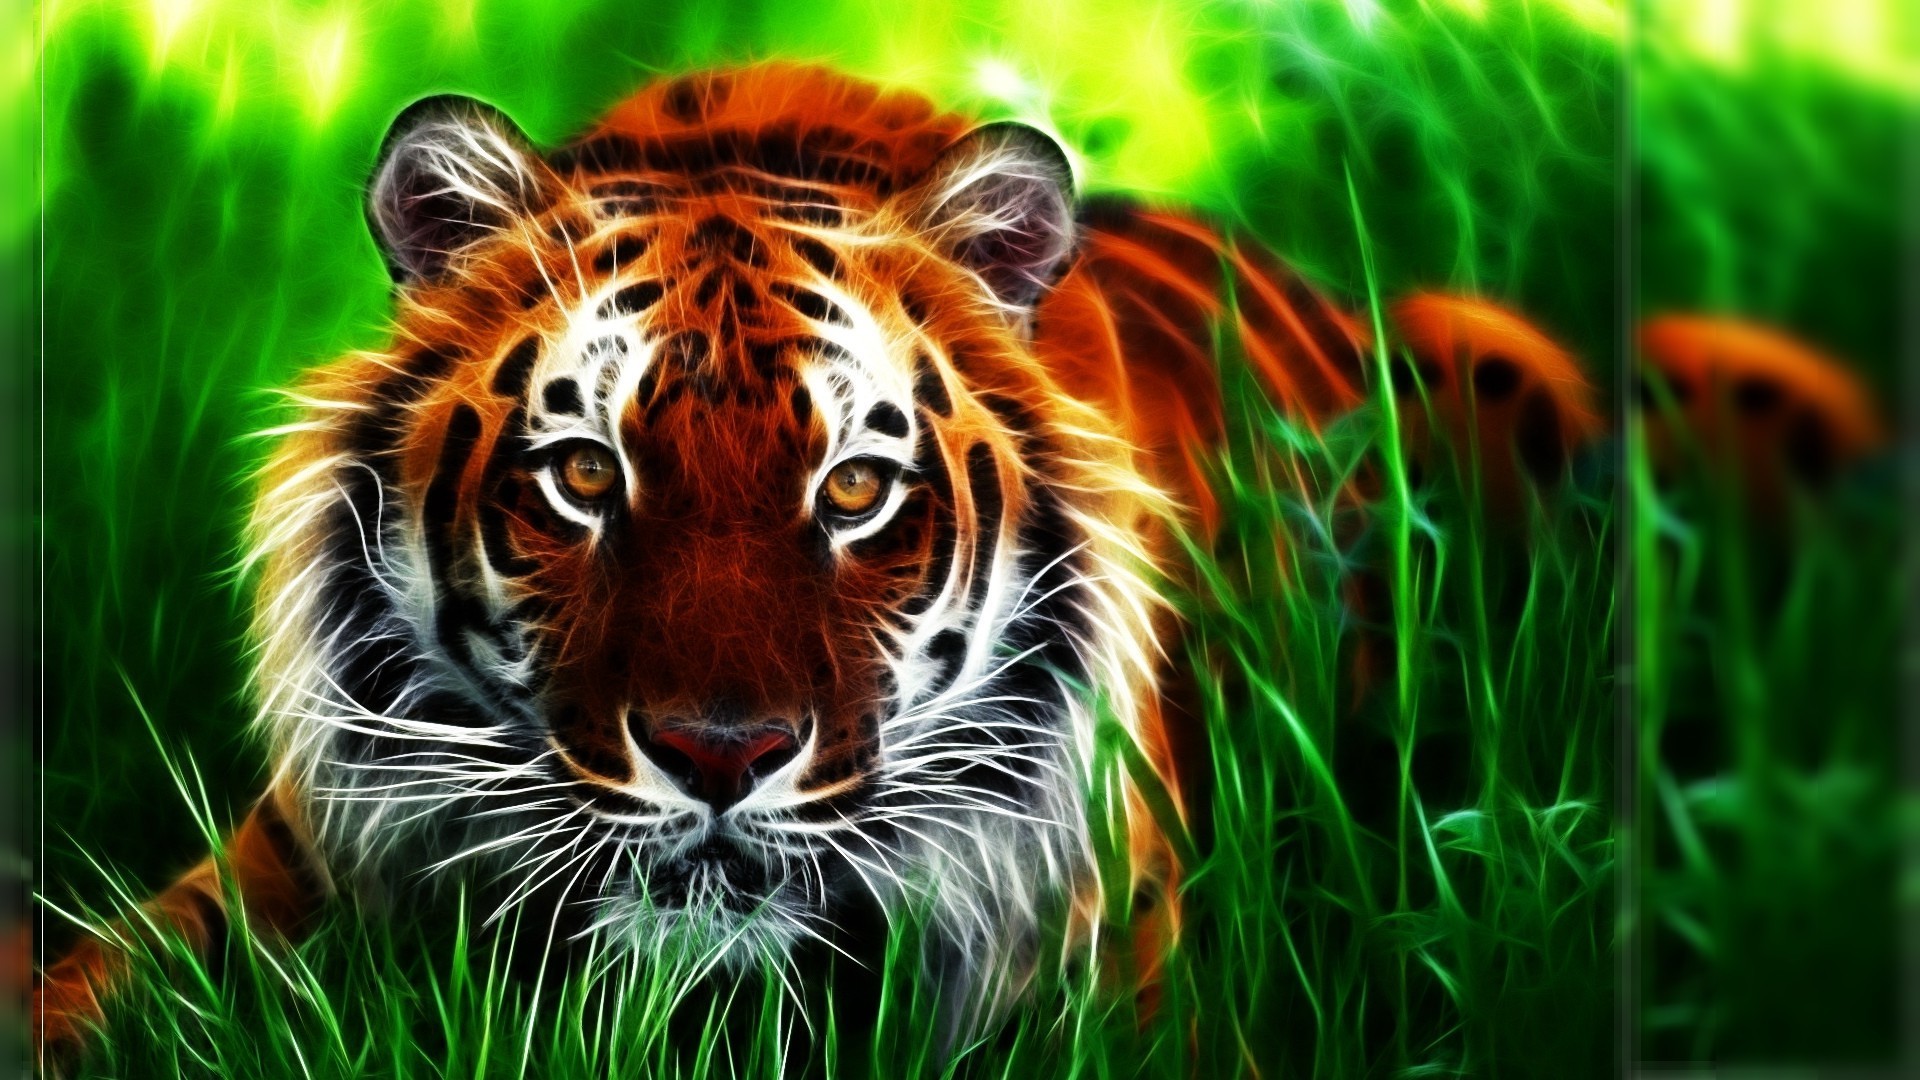 1920x1080  Tiger 3D Widescreen Background Wallpapers